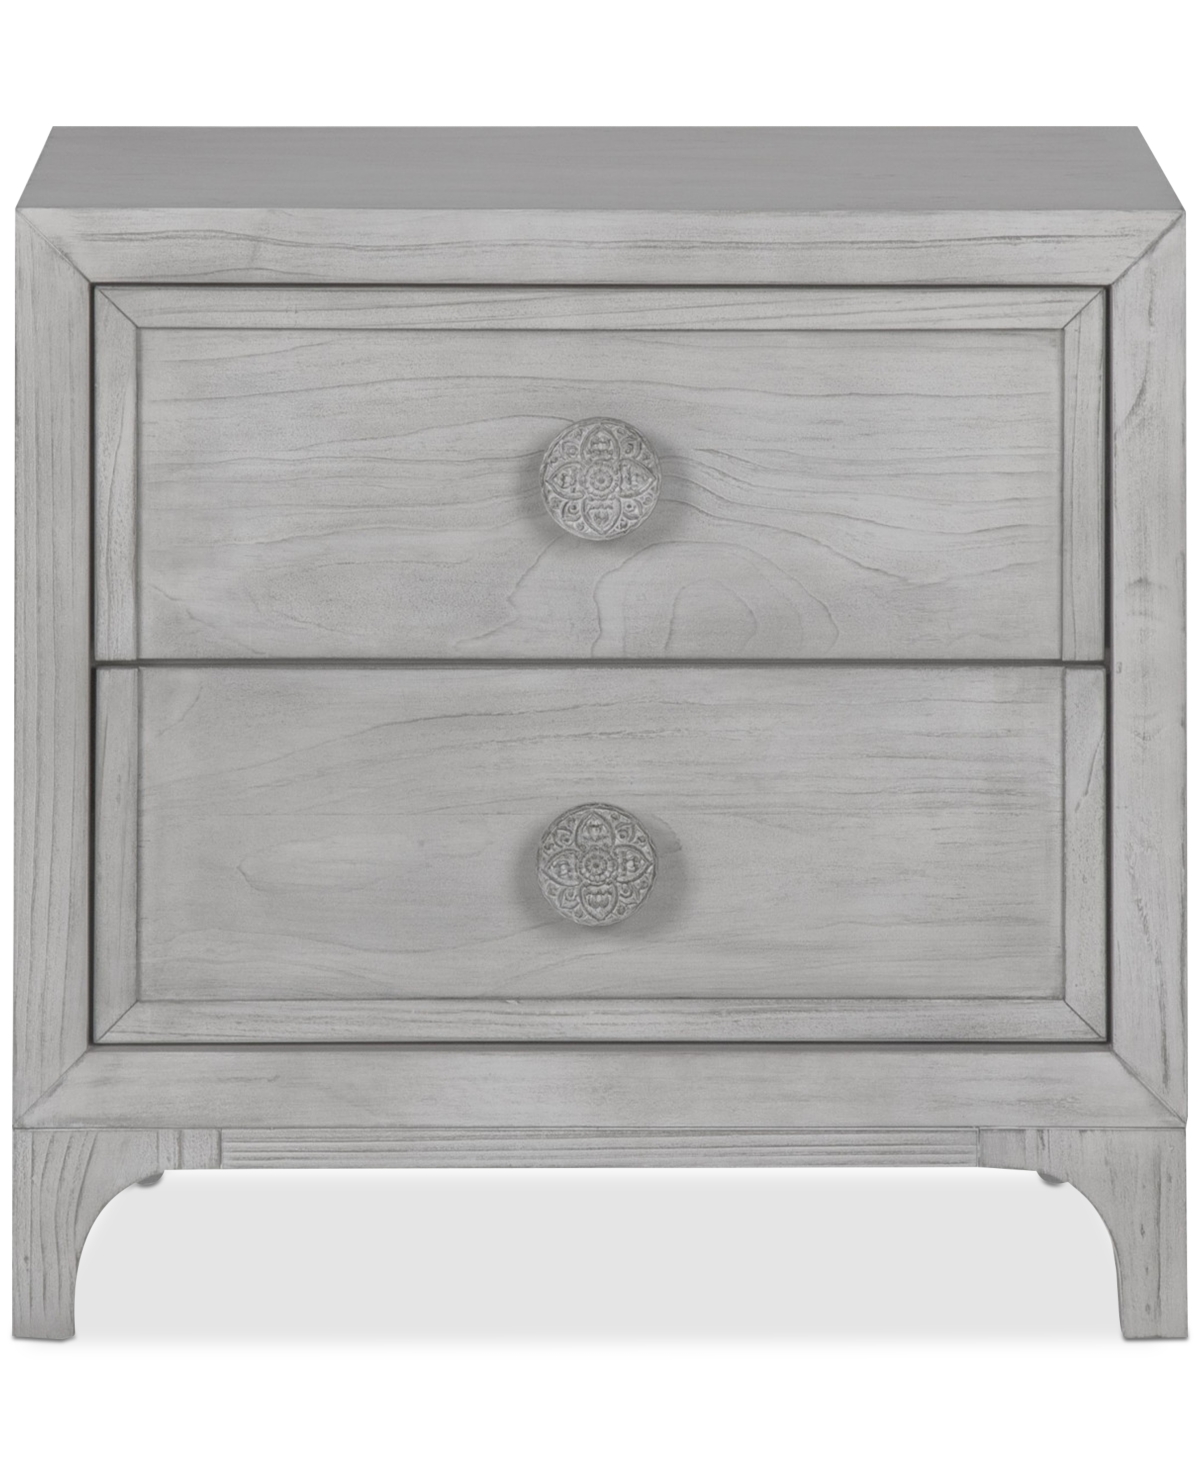 Furniture Boho Chic Nightstand In Washed Wht